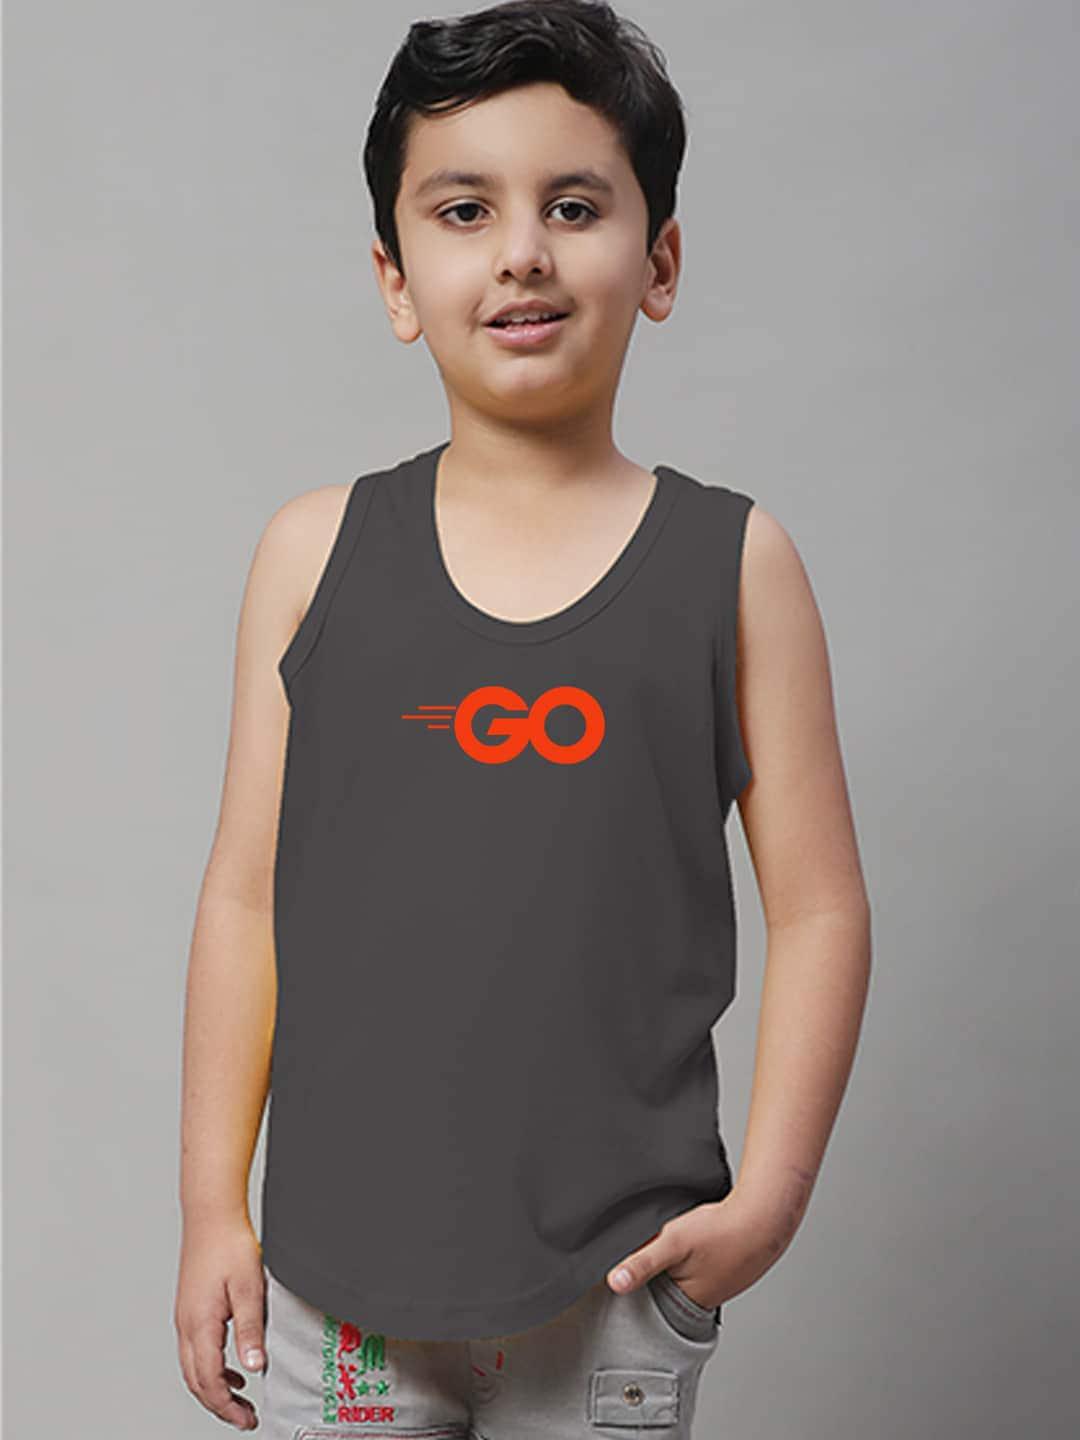 Friskers Boys Printed Round Neck Sleeveless Pure Cotton Gym Innerwear Vests